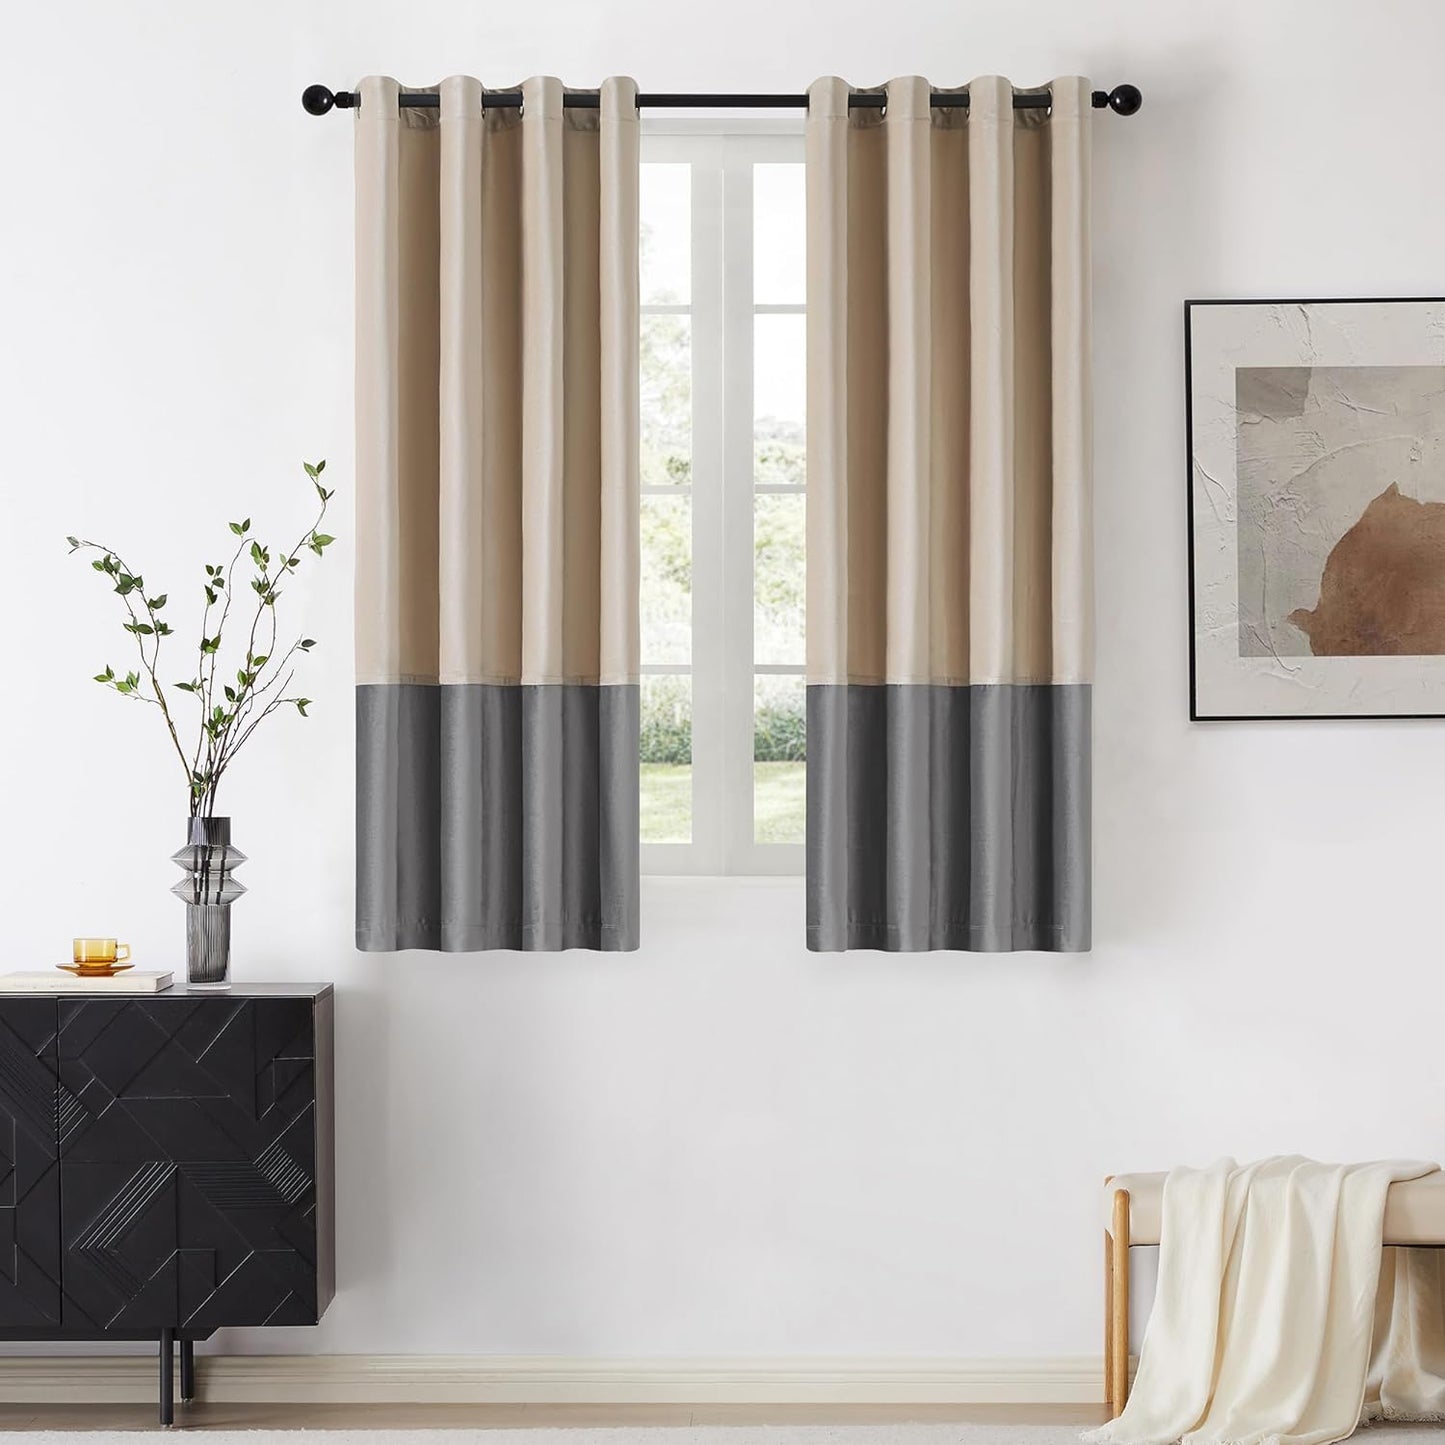 BULBUL Black Gold Color Block Window Curtains Panels 84 Inches Long Velvet Farmhouse Drapes for Bedroom Living Room Darkening Treatment with Grommet Set of Black Gold  BULBUL Champagne  Grey 52"W X 63"L 